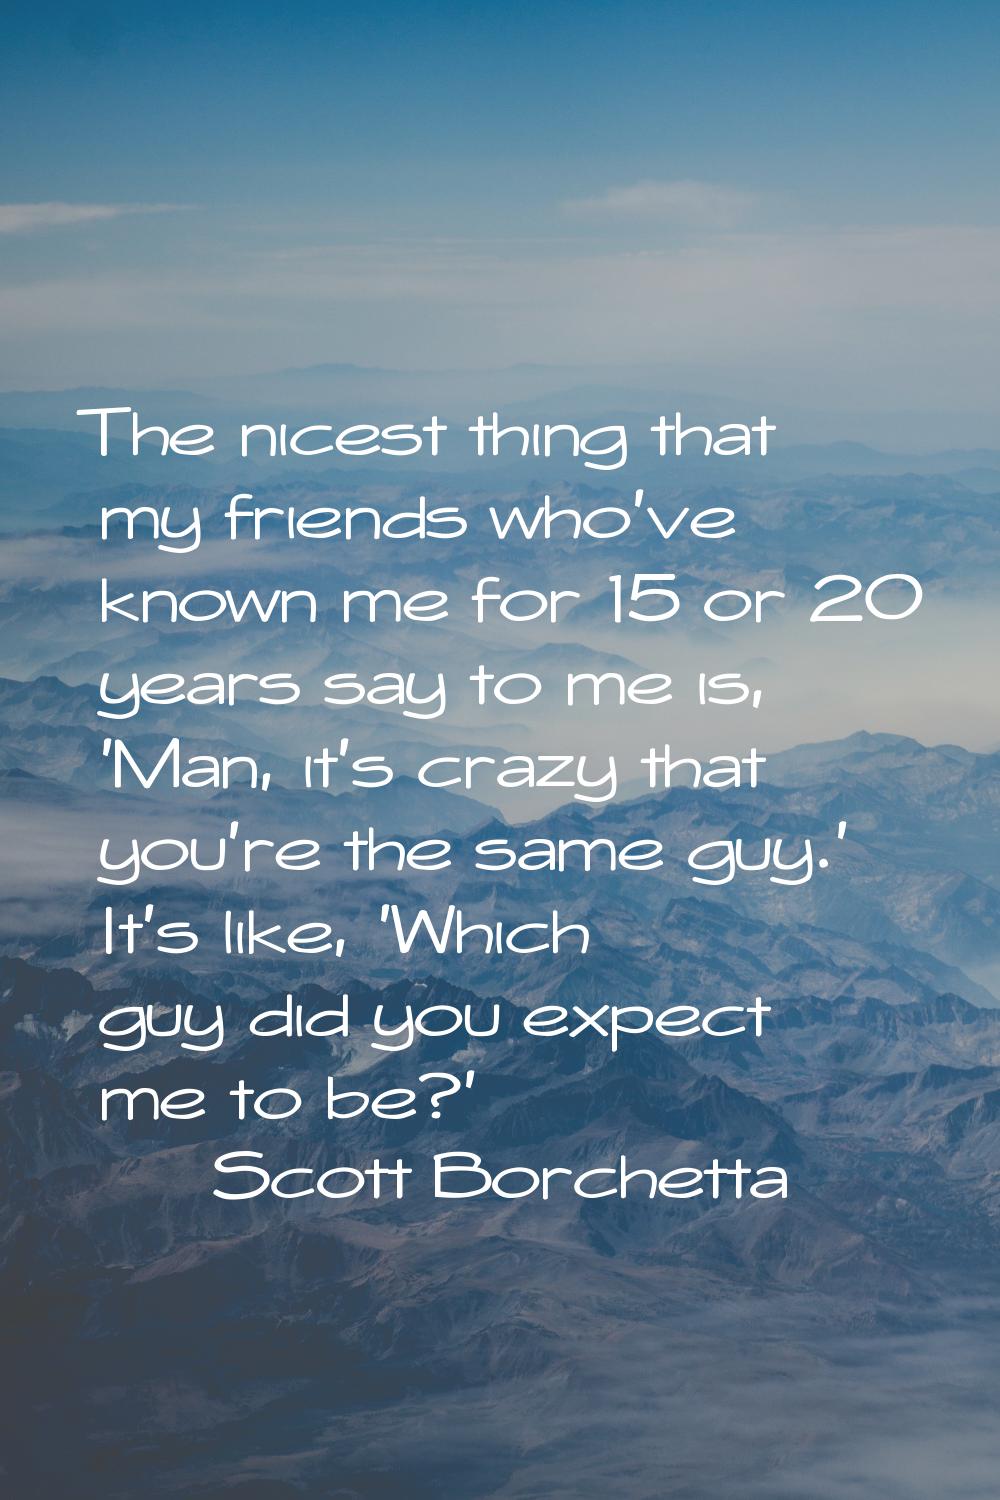 The nicest thing that my friends who've known me for 15 or 20 years say to me is, 'Man, it's crazy 